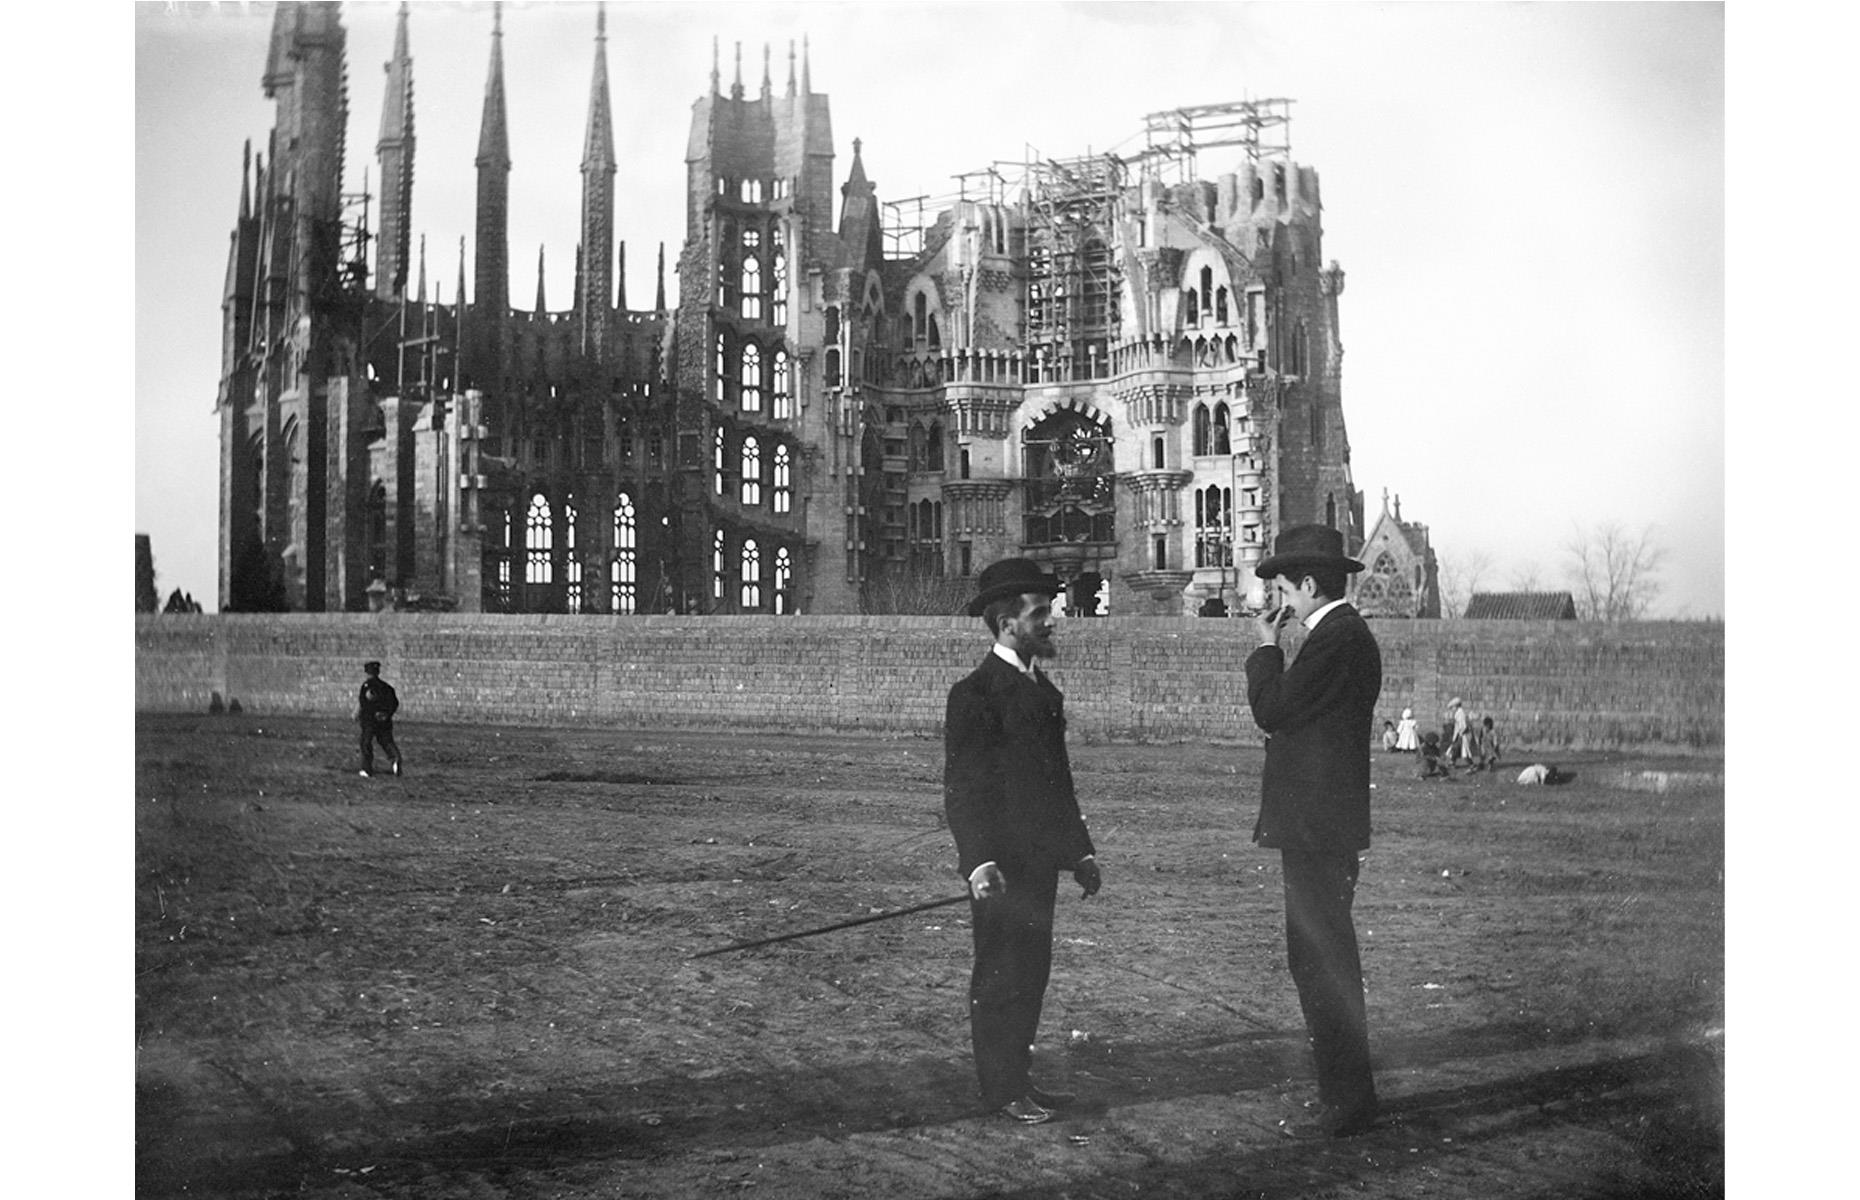 <p>Construction had already been underway for 23 years when this photo of these smart chaps was taken beside the Sagrada Familia in Barcelona in 1905. Designed by eccentric Catalan architect Antoni Gaudi, it remains the largest unfinished Catholic church in the world. It was Gaudi’s most audacious and spectacular creation, with the current scheduled finish date set for 2026, the centenary of his death.</p>